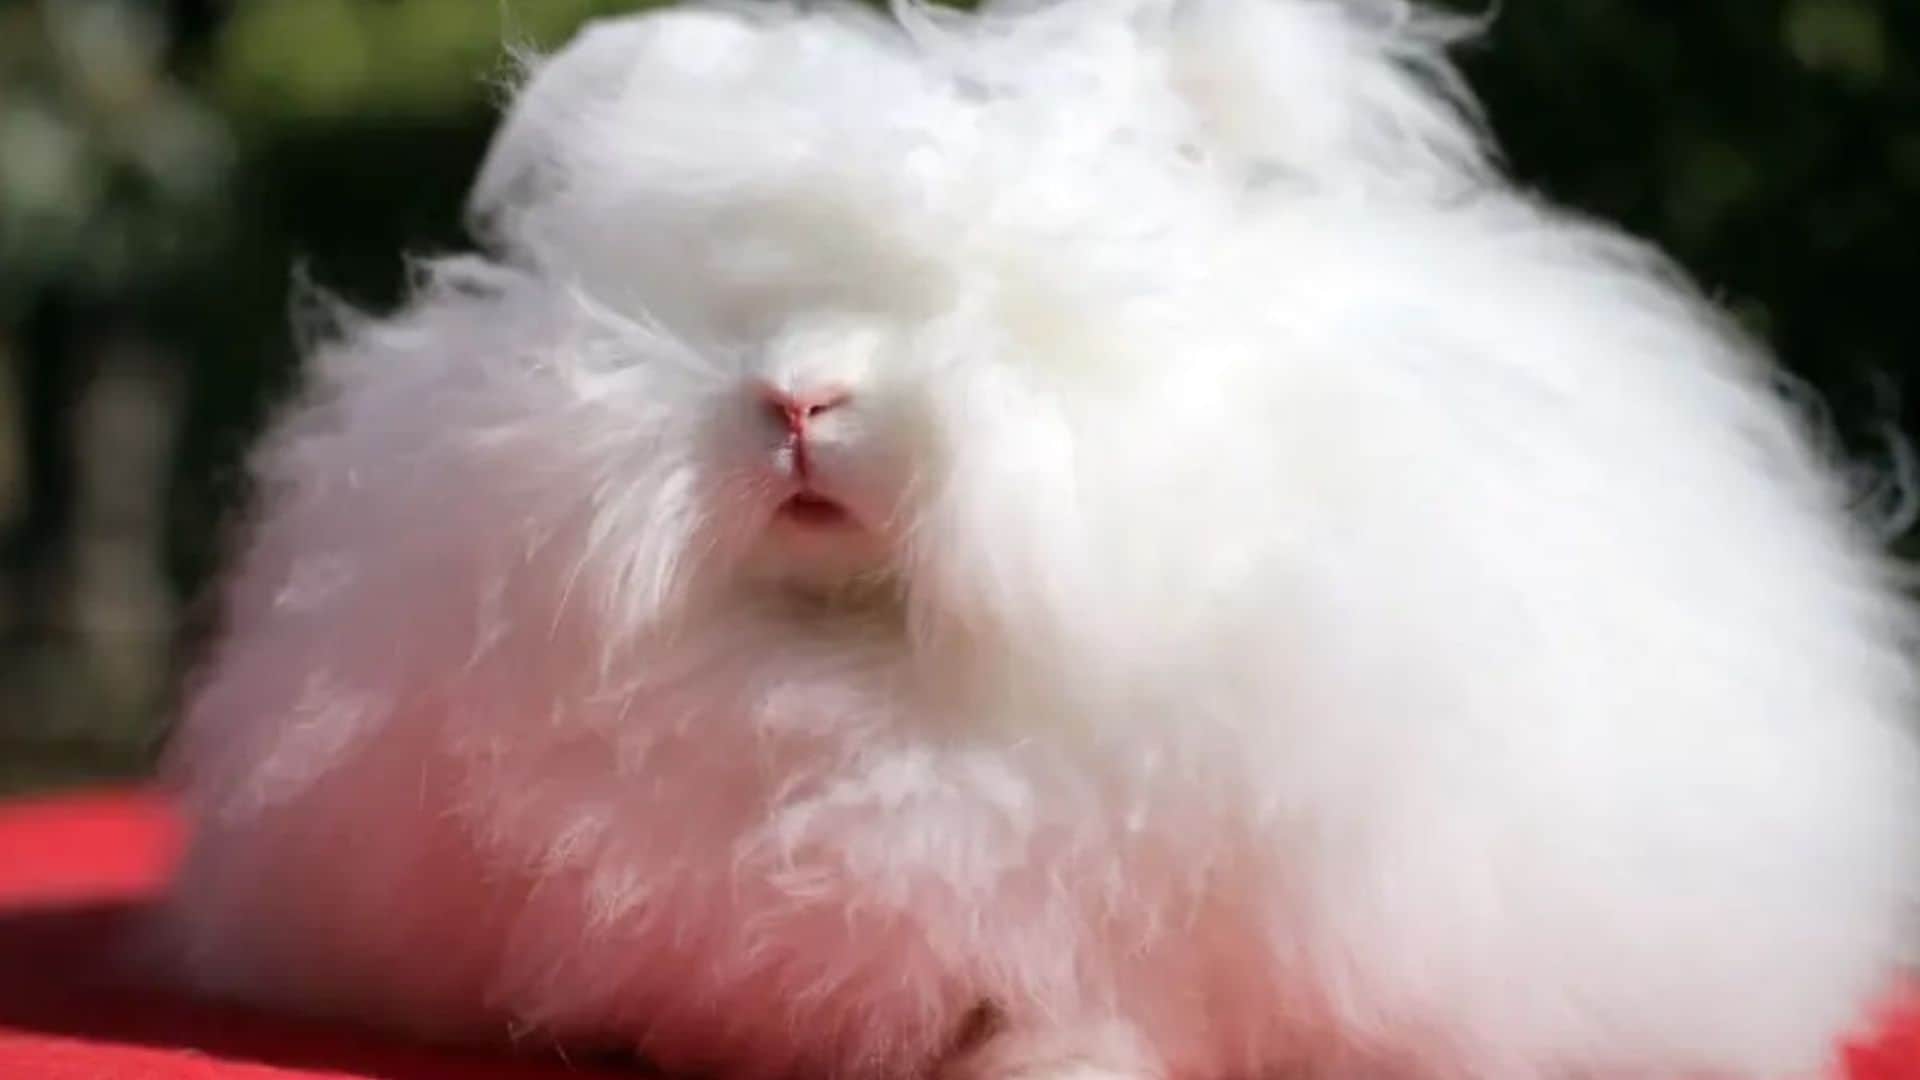 Pet of the week: Meet Franchesca, the world’s fluffiest bunny